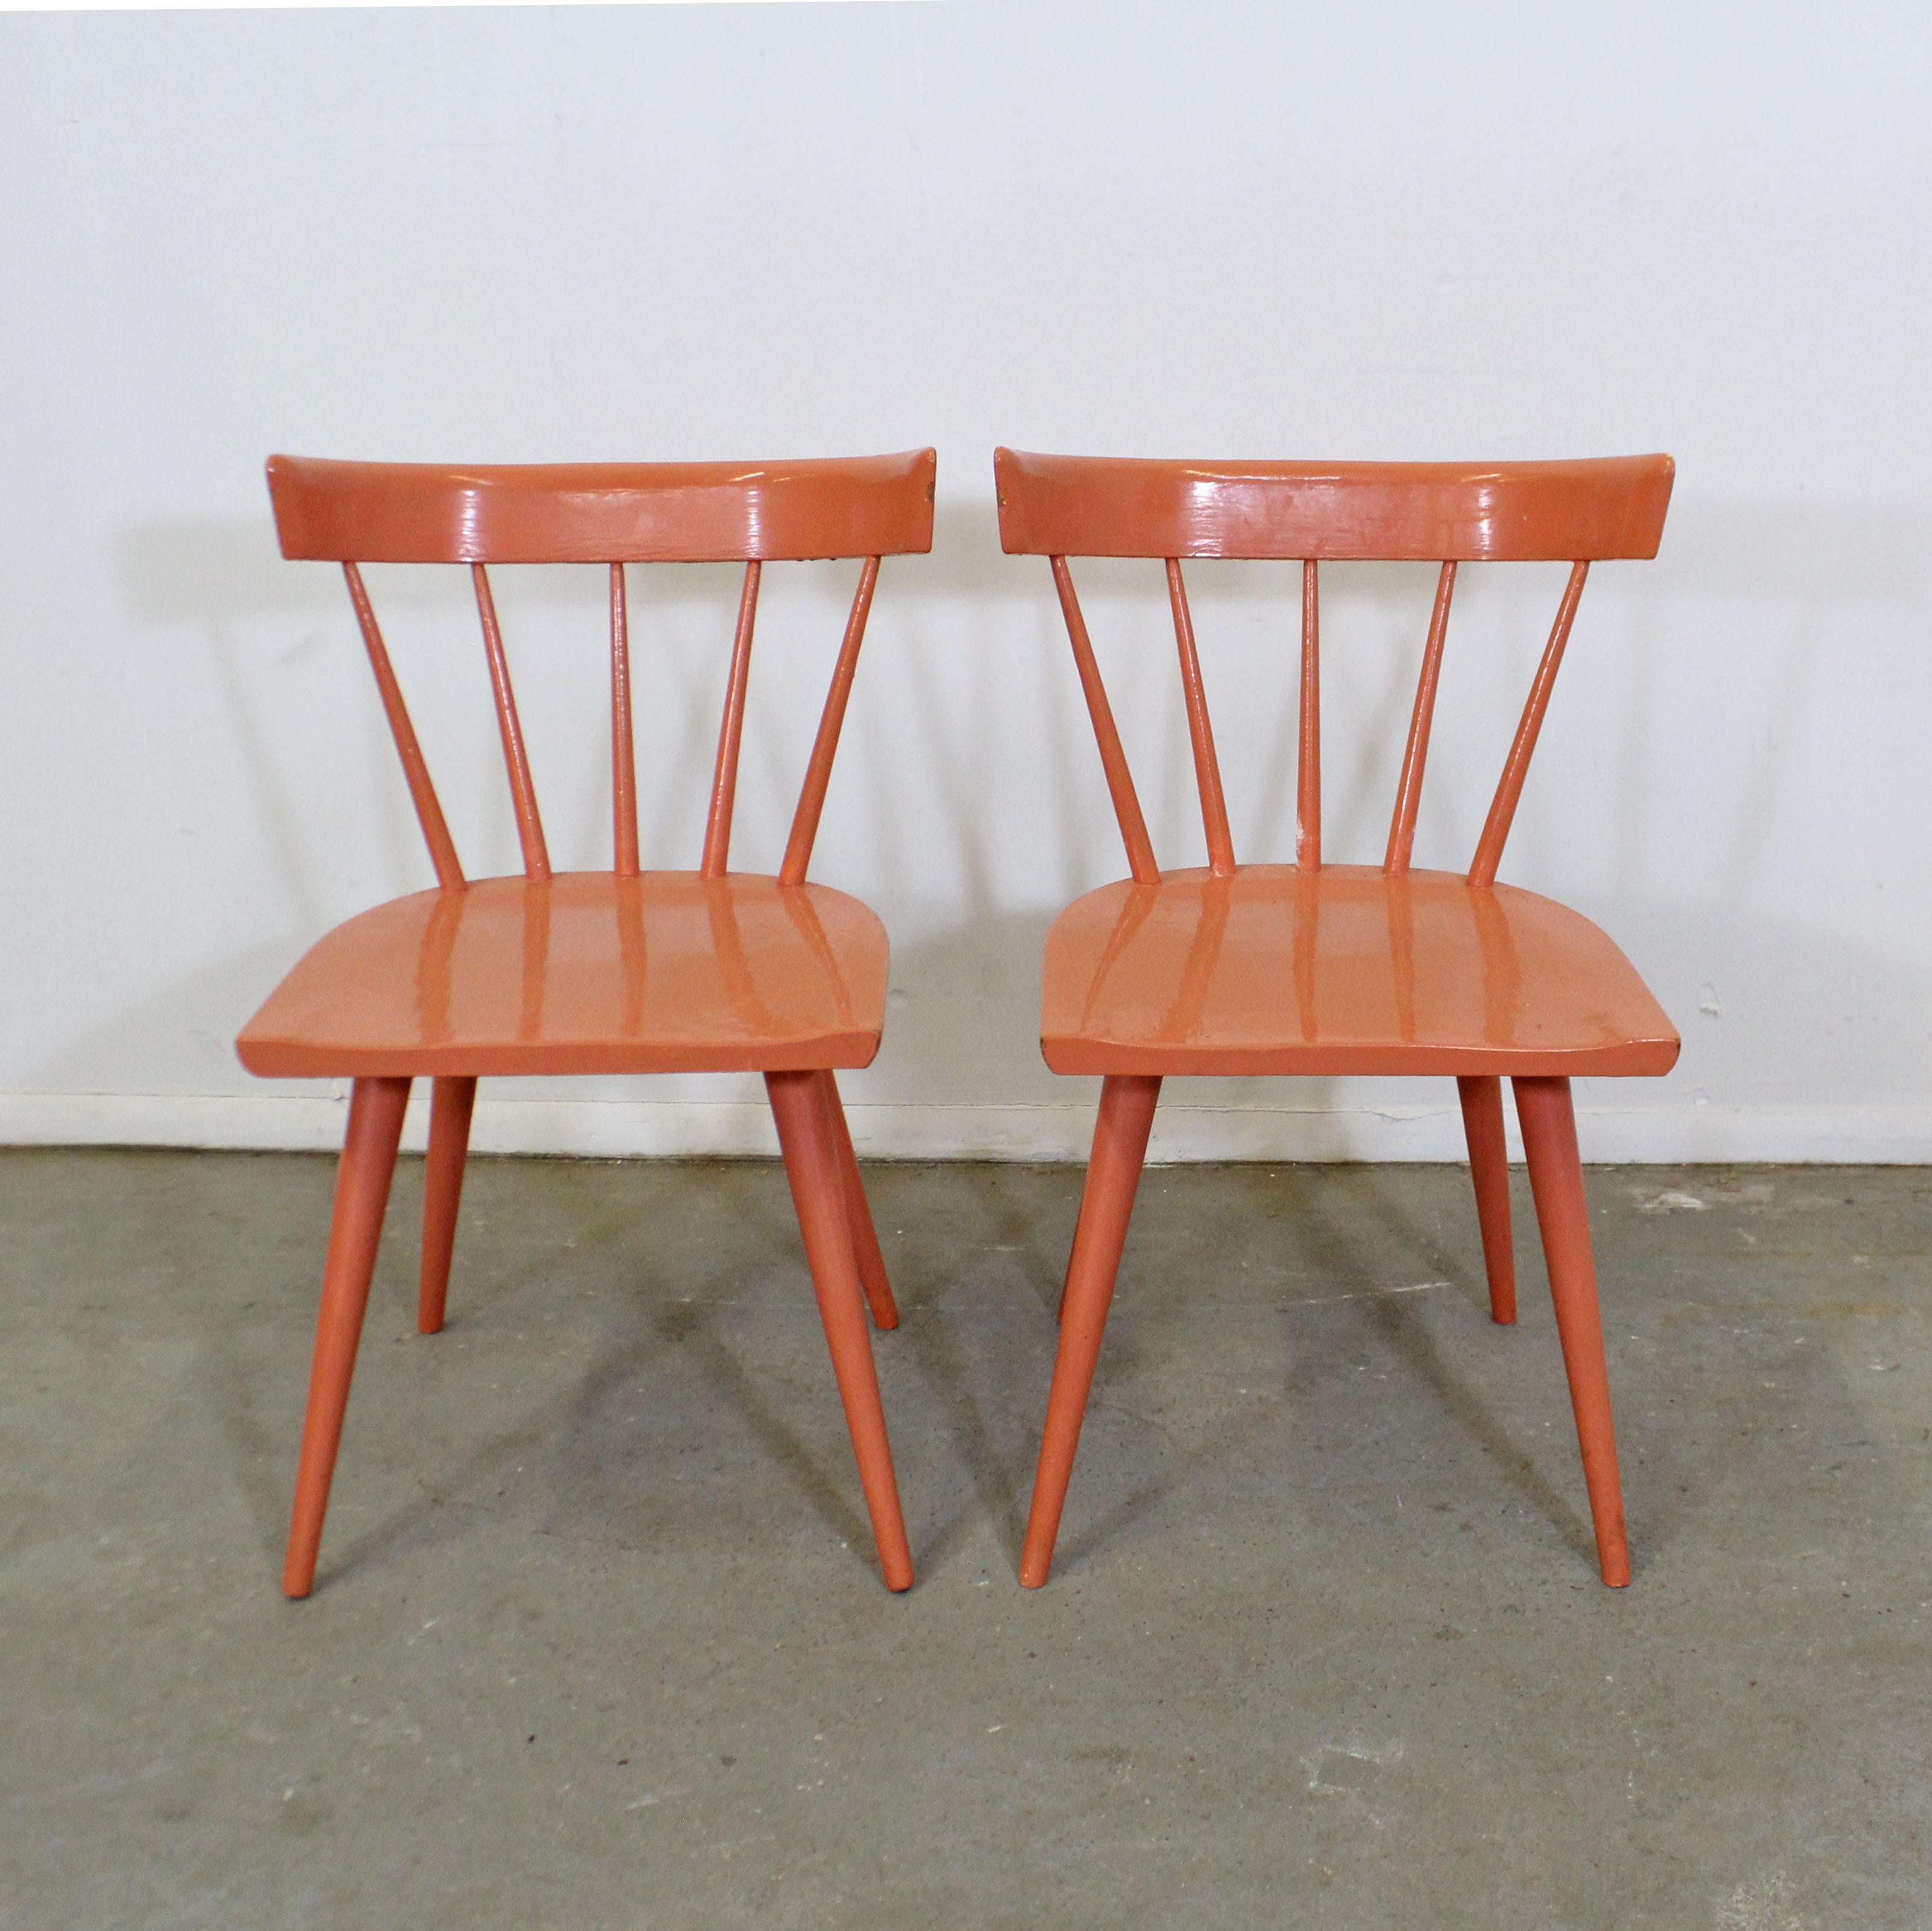 What a find. Offered is a vintage pair of spindle-back side chairs, designed by Paul McCobb for Planner Group. These are solid chair that have been repainted by their previous owner. They are in good, structurally sound condition with some paint